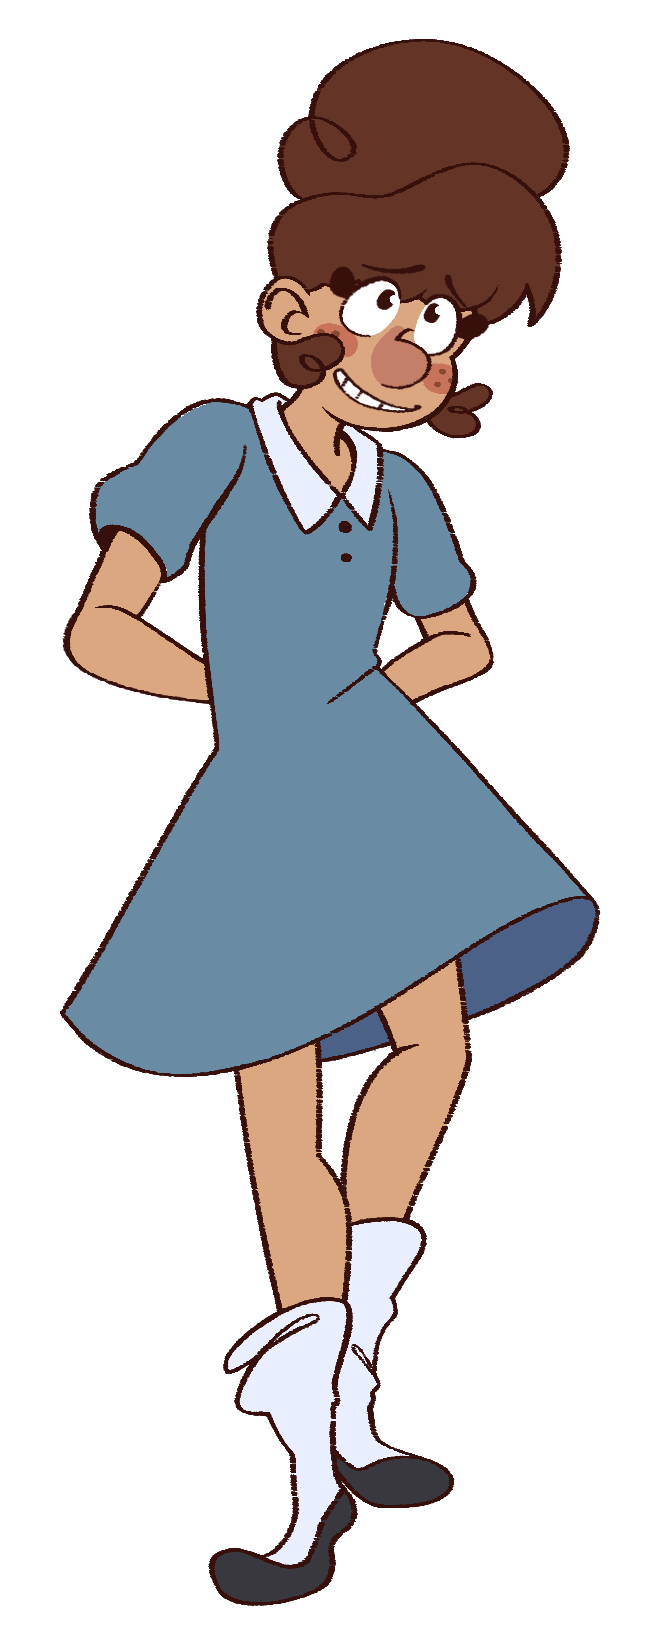 A fullbody drawing of Macy; she has brown curly hair in a high ponytail and wears a blue dress with a white collar and white socks; a nervous smile on her face